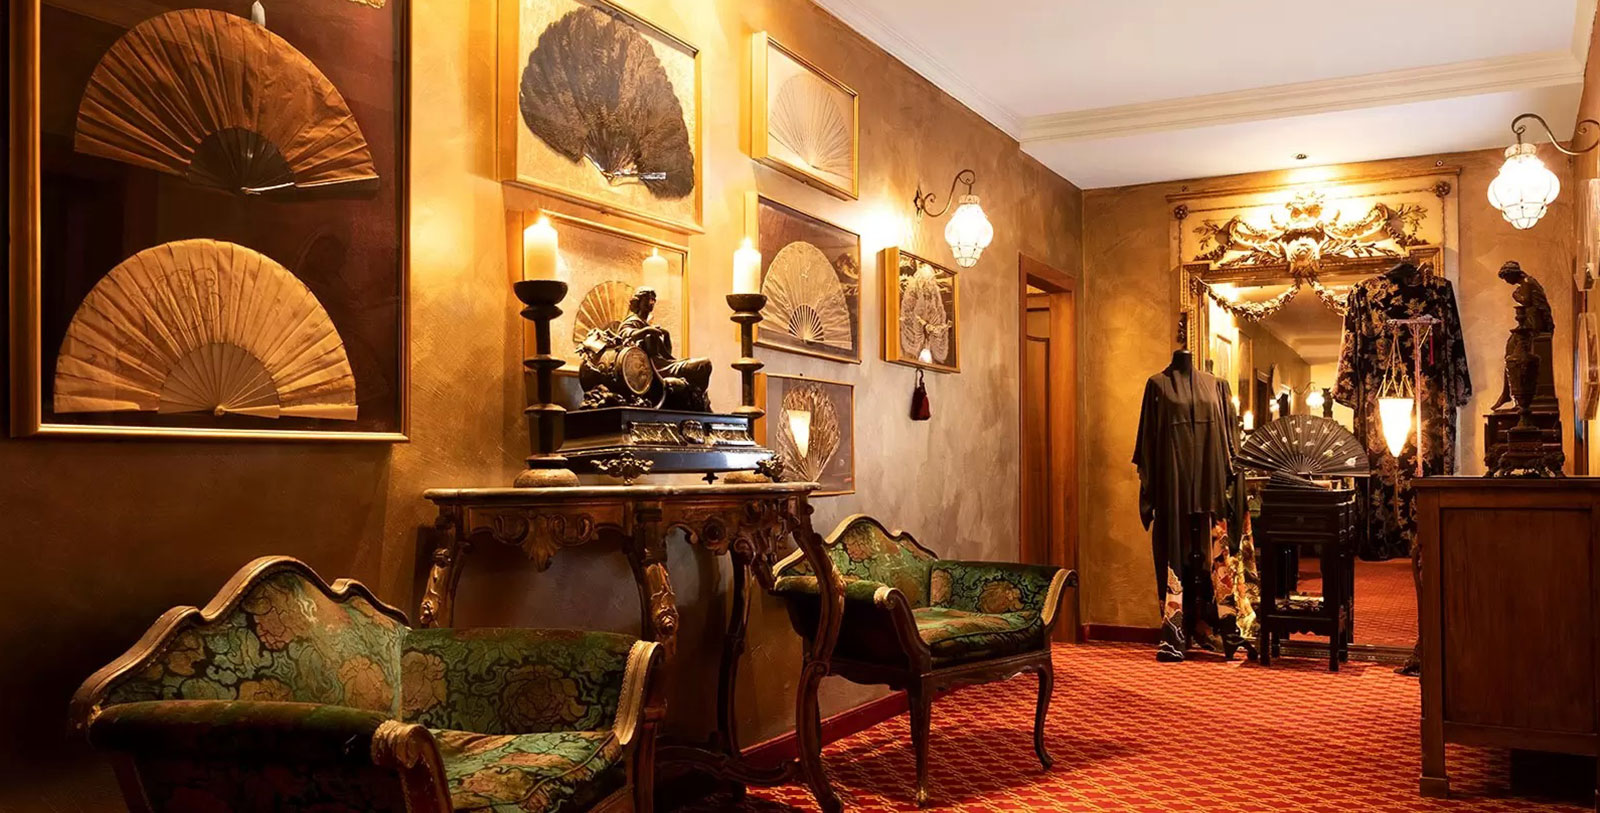 Image of Wunderkammer antiques, Metropole Hotel, 1500, Member of Historic Hotels Worldwide, in Venice, Italy, Discover